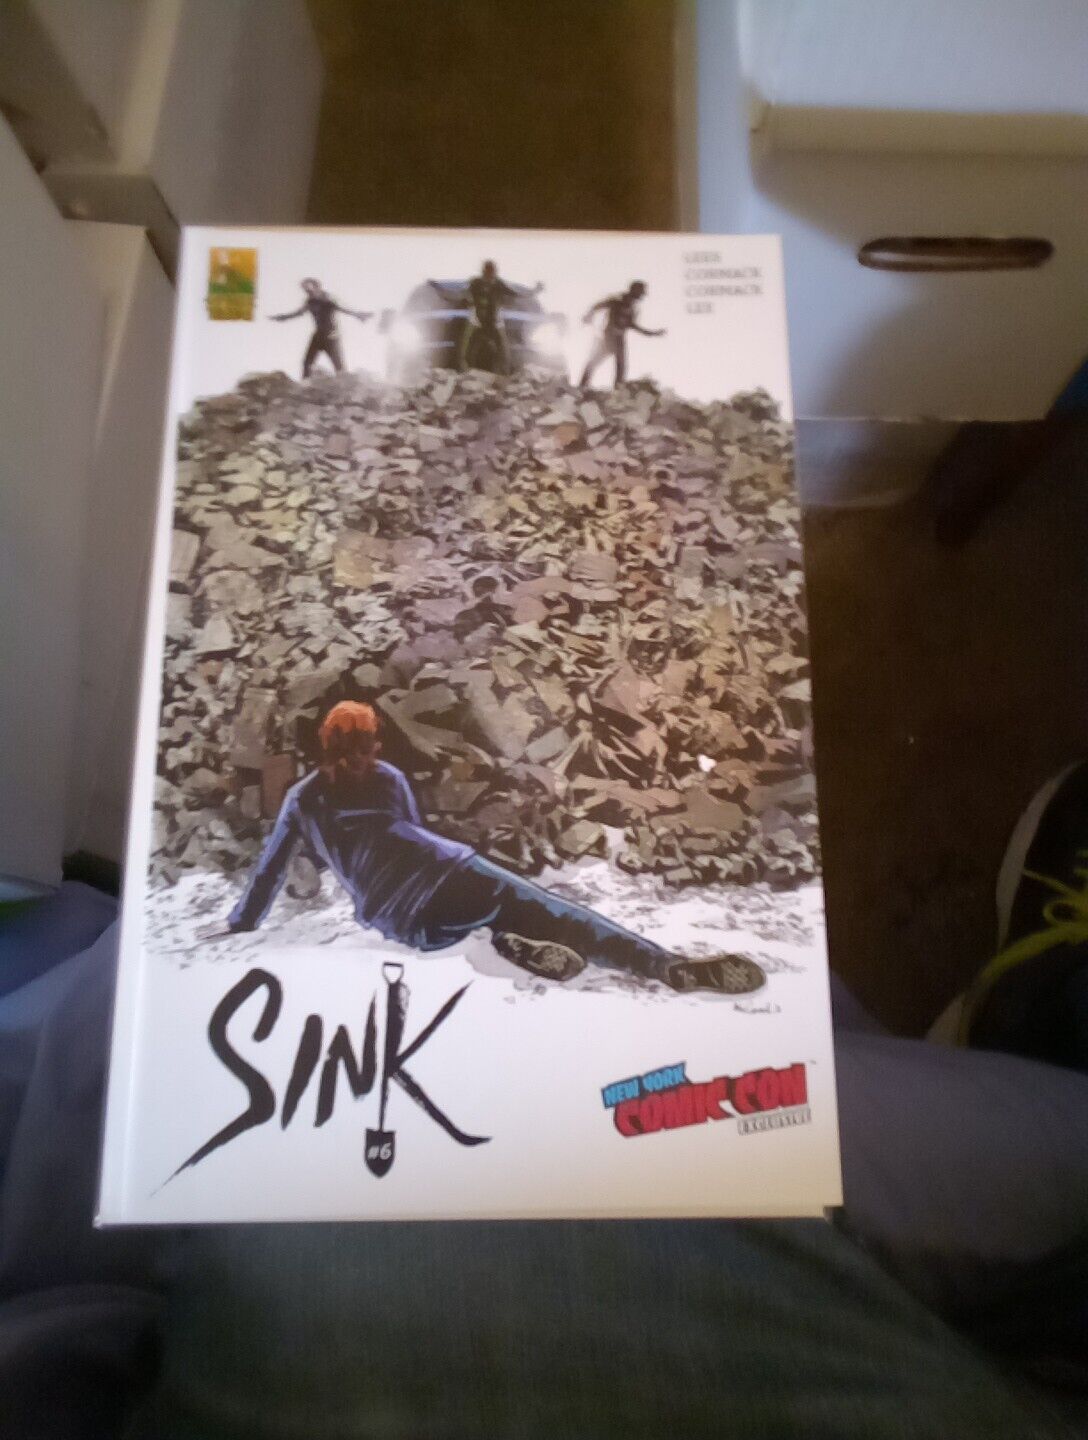 Sink #6C, NYCC 2018 Exclusive, Comix Tribe